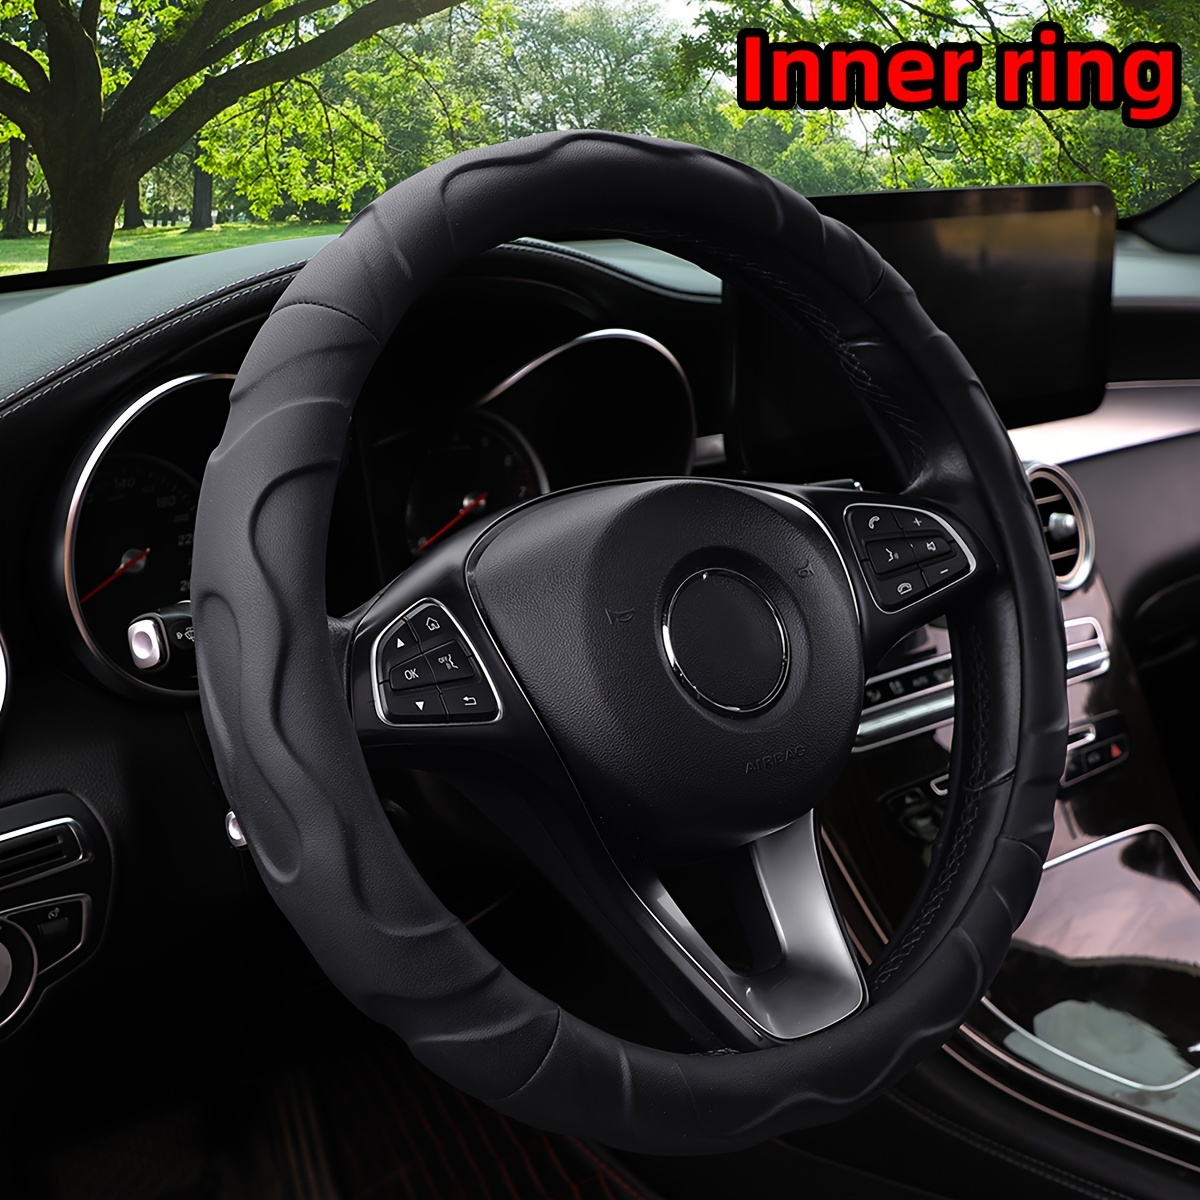 

1pc Artificial Lambskin Feel Three-dimensional Shape Sports Car Steering Wheel Cover Car Accessories Suitable For 14.5-15 Inches 37-38cm